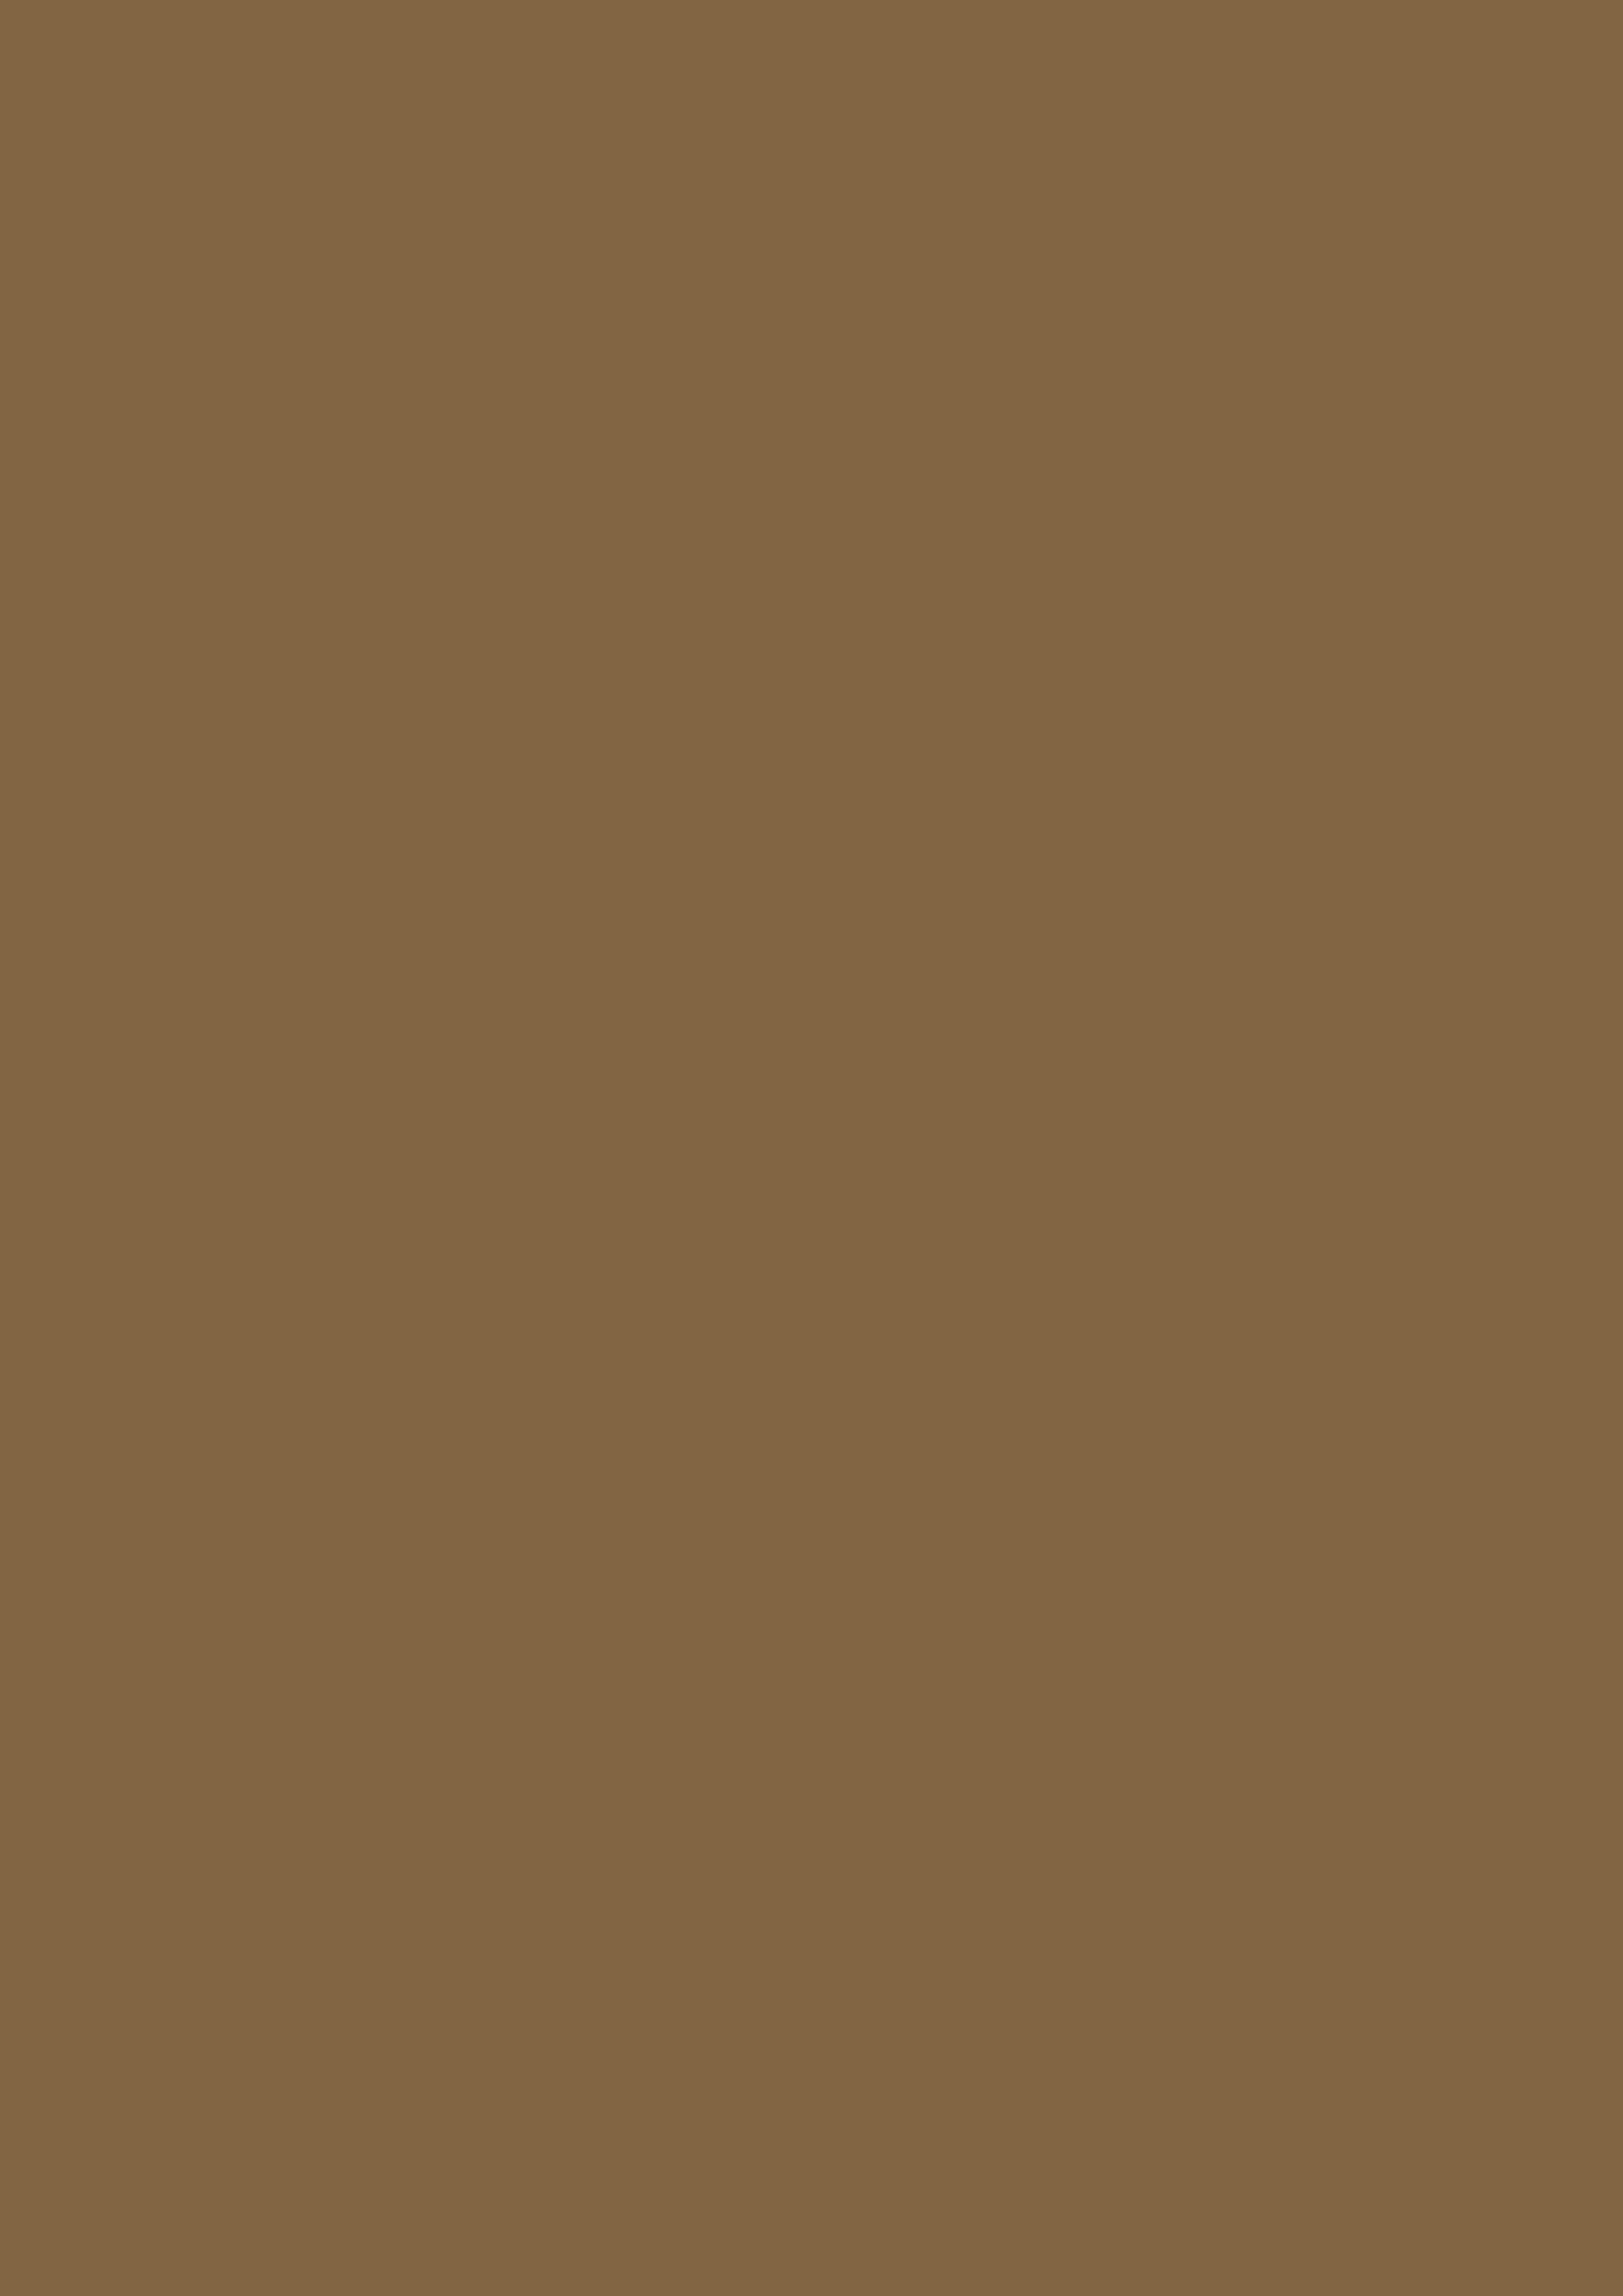 2480x3508 Raw Umber Solid Color Background